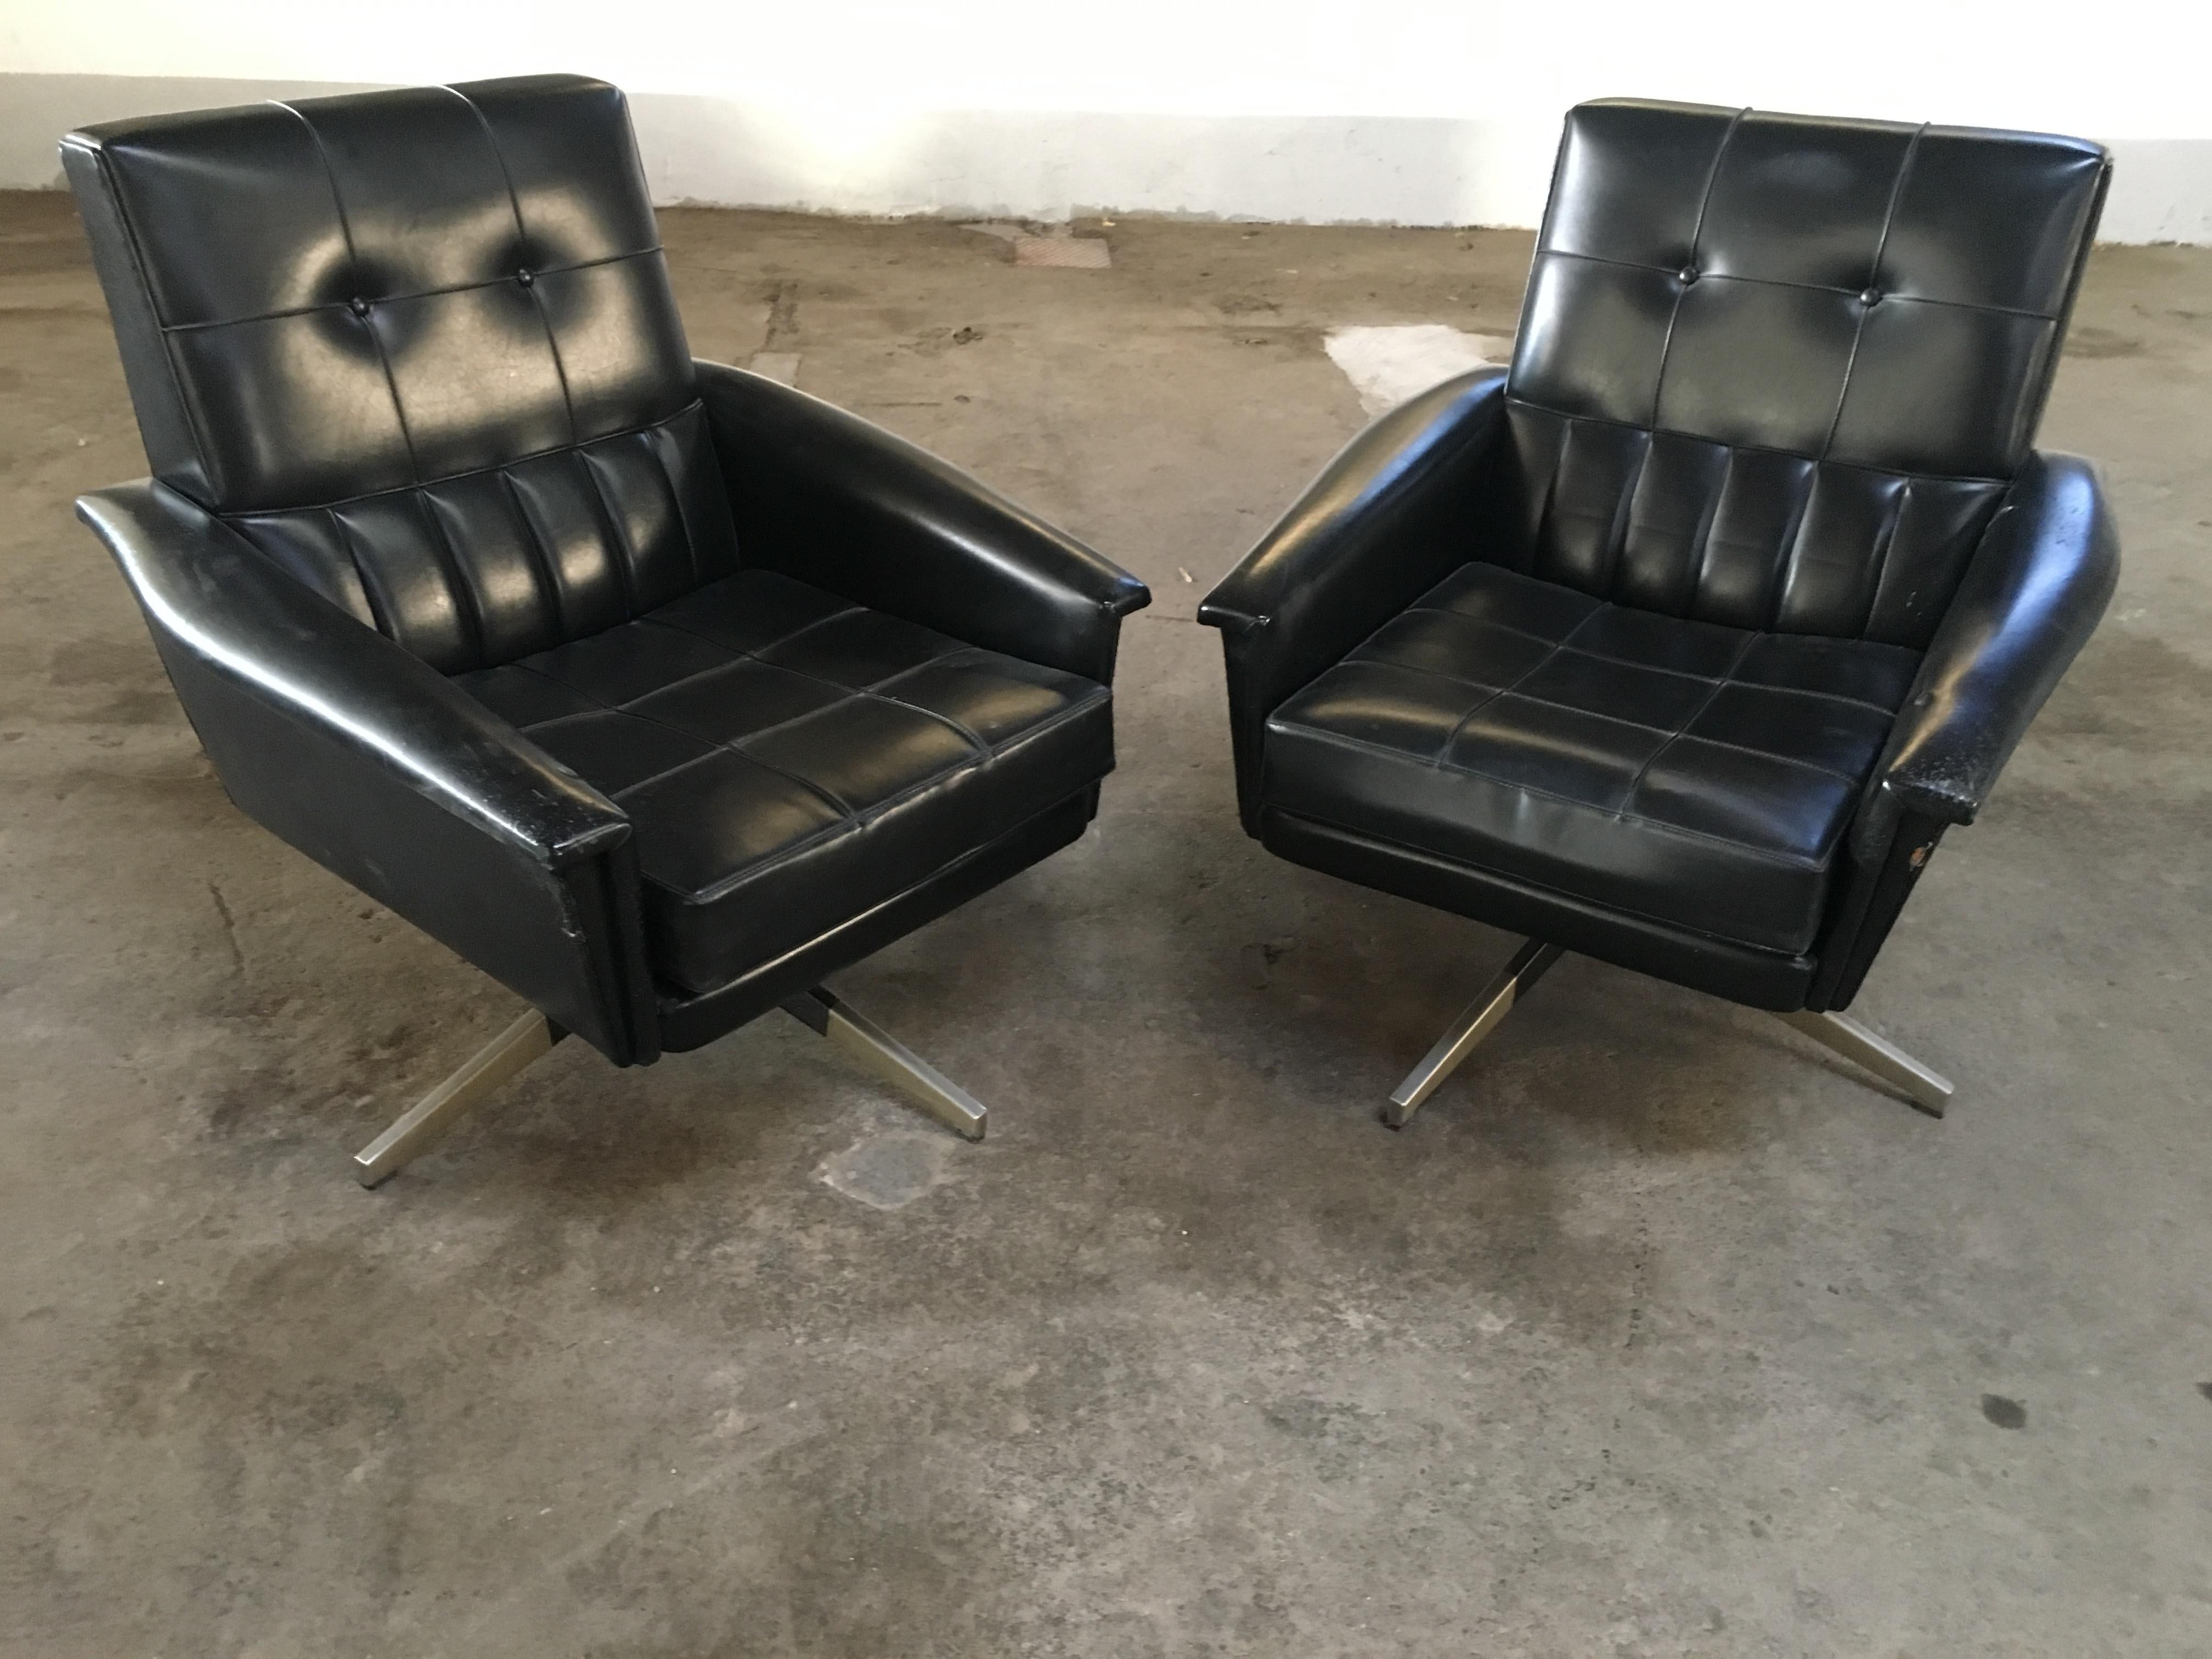 Mid-Century Modern pair of Italian revolving office armchairs in black faux leather with brass legs, 1960s
The armchairs show some wear due to age and use. They are in general good vintage conditions.
 